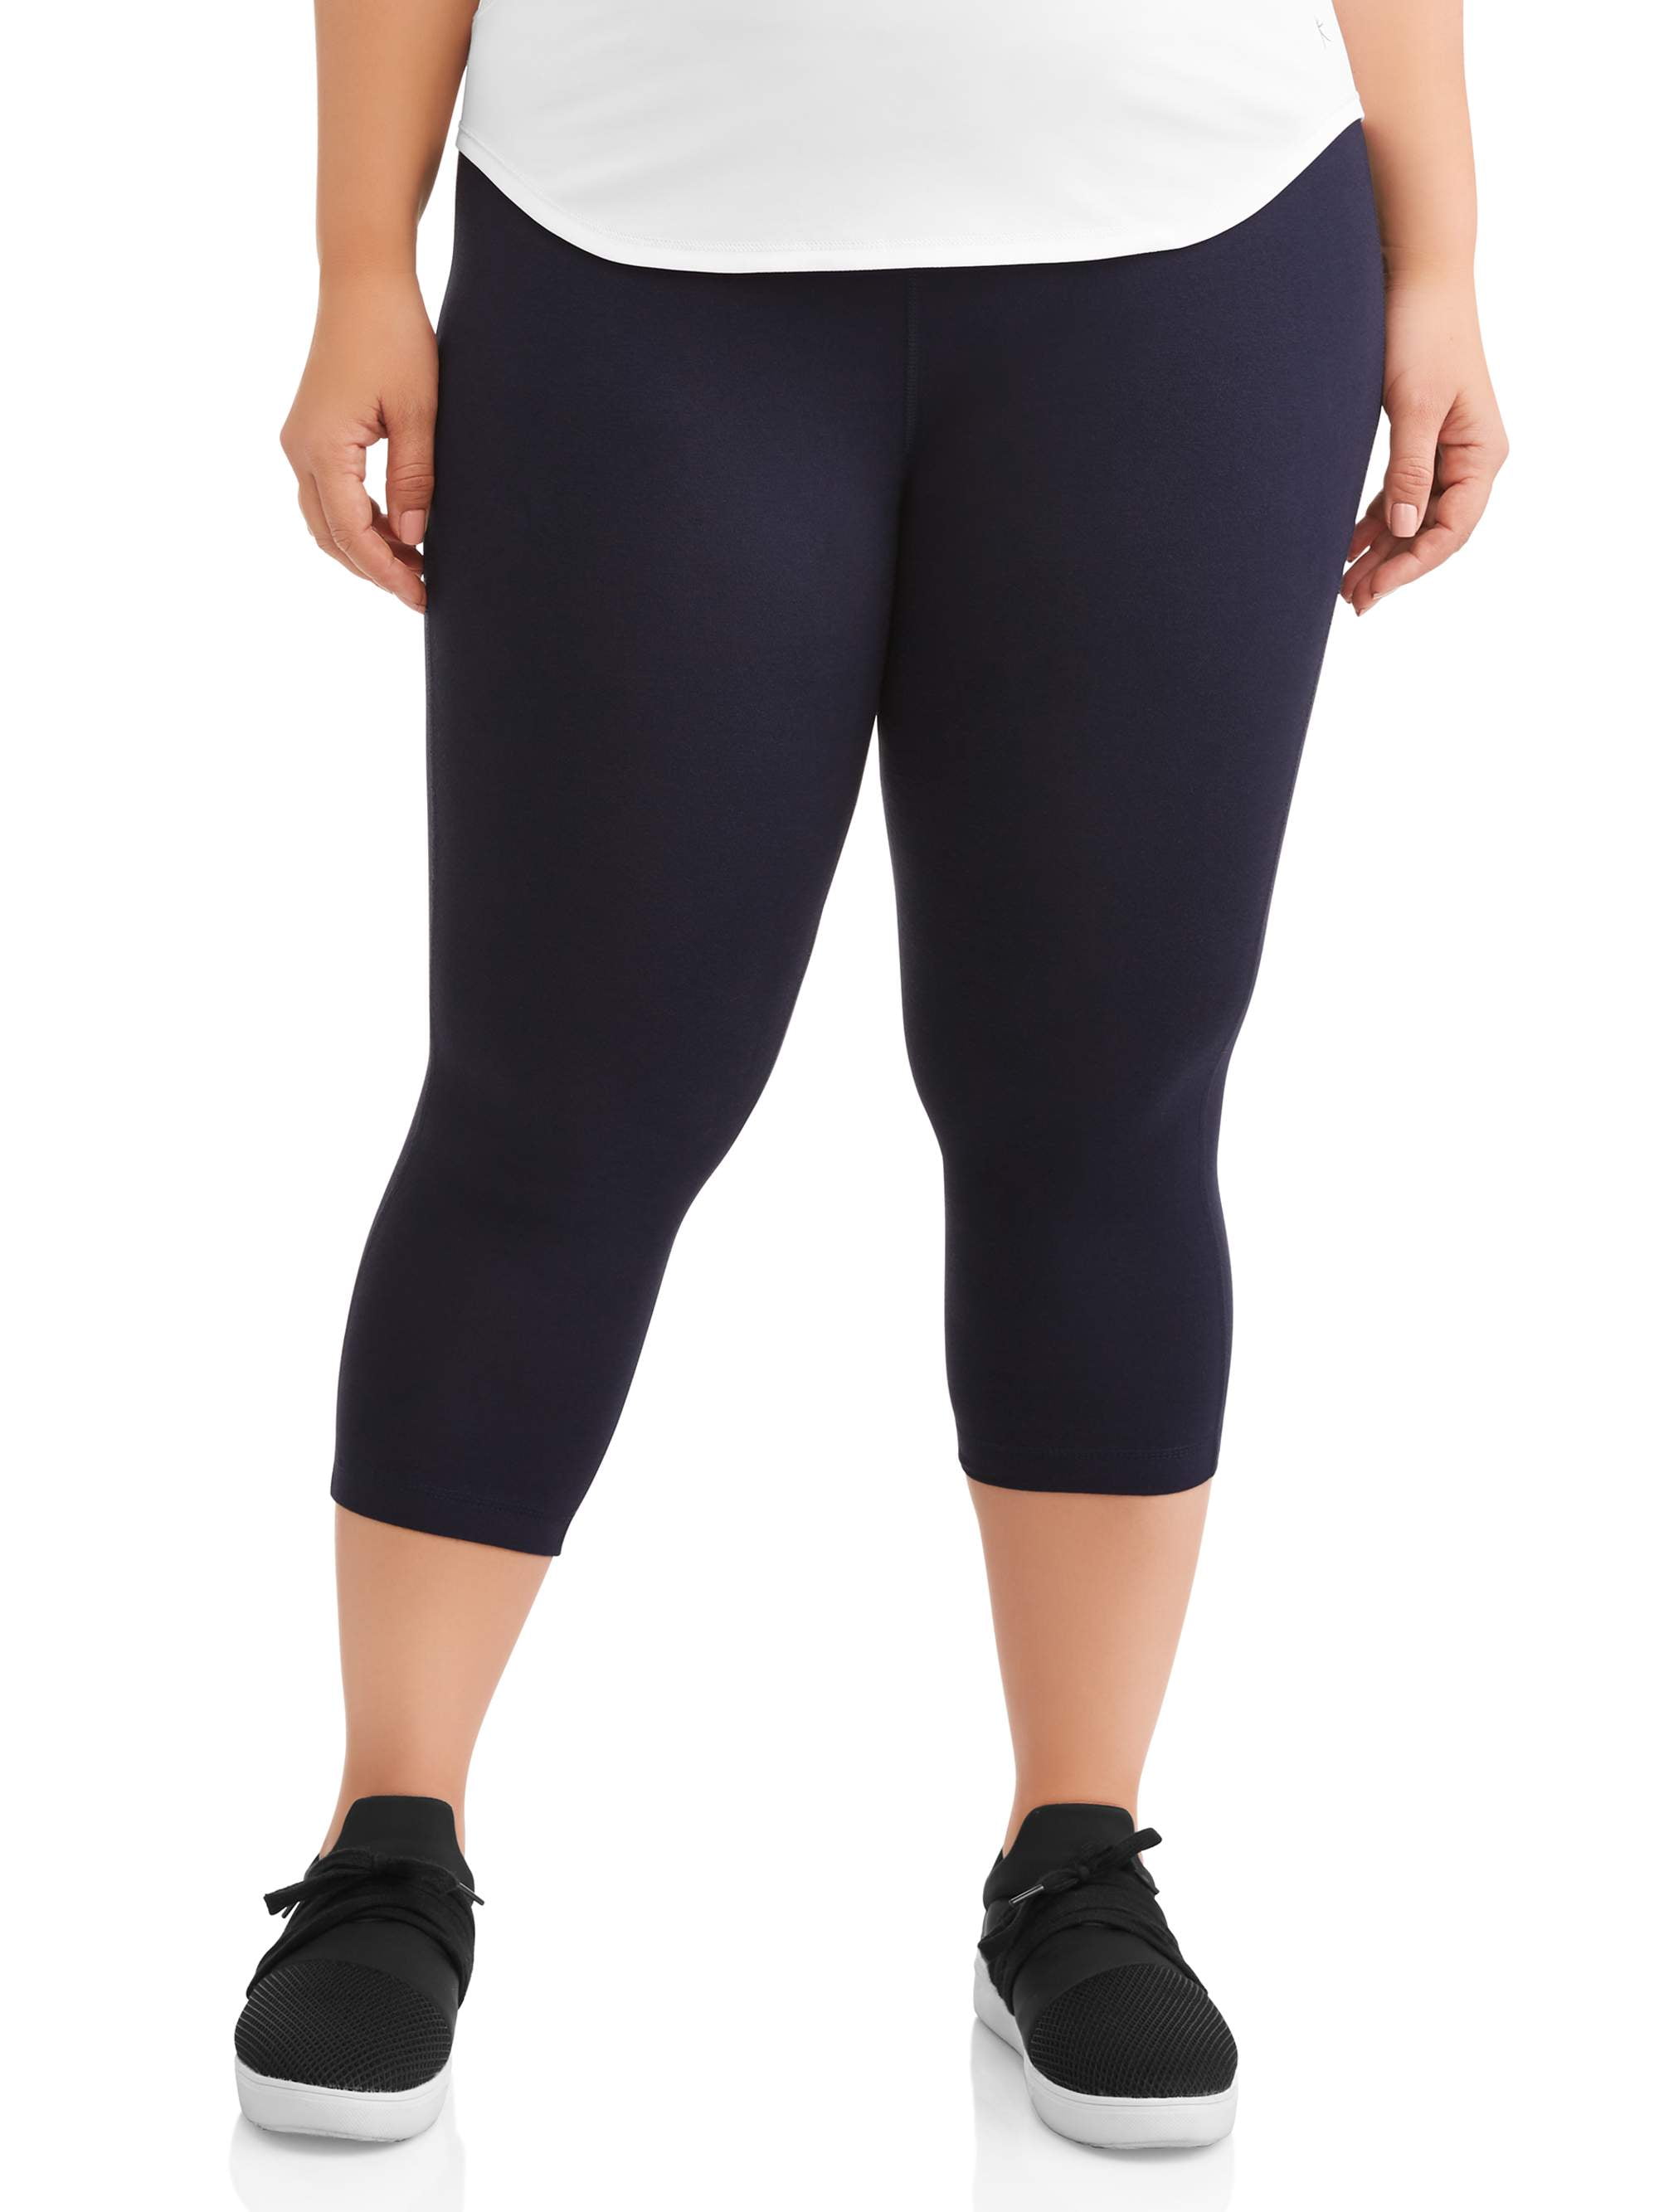 Summer Lady Plus SIze Legging 2 tones comfort pants footless Sports Casual 